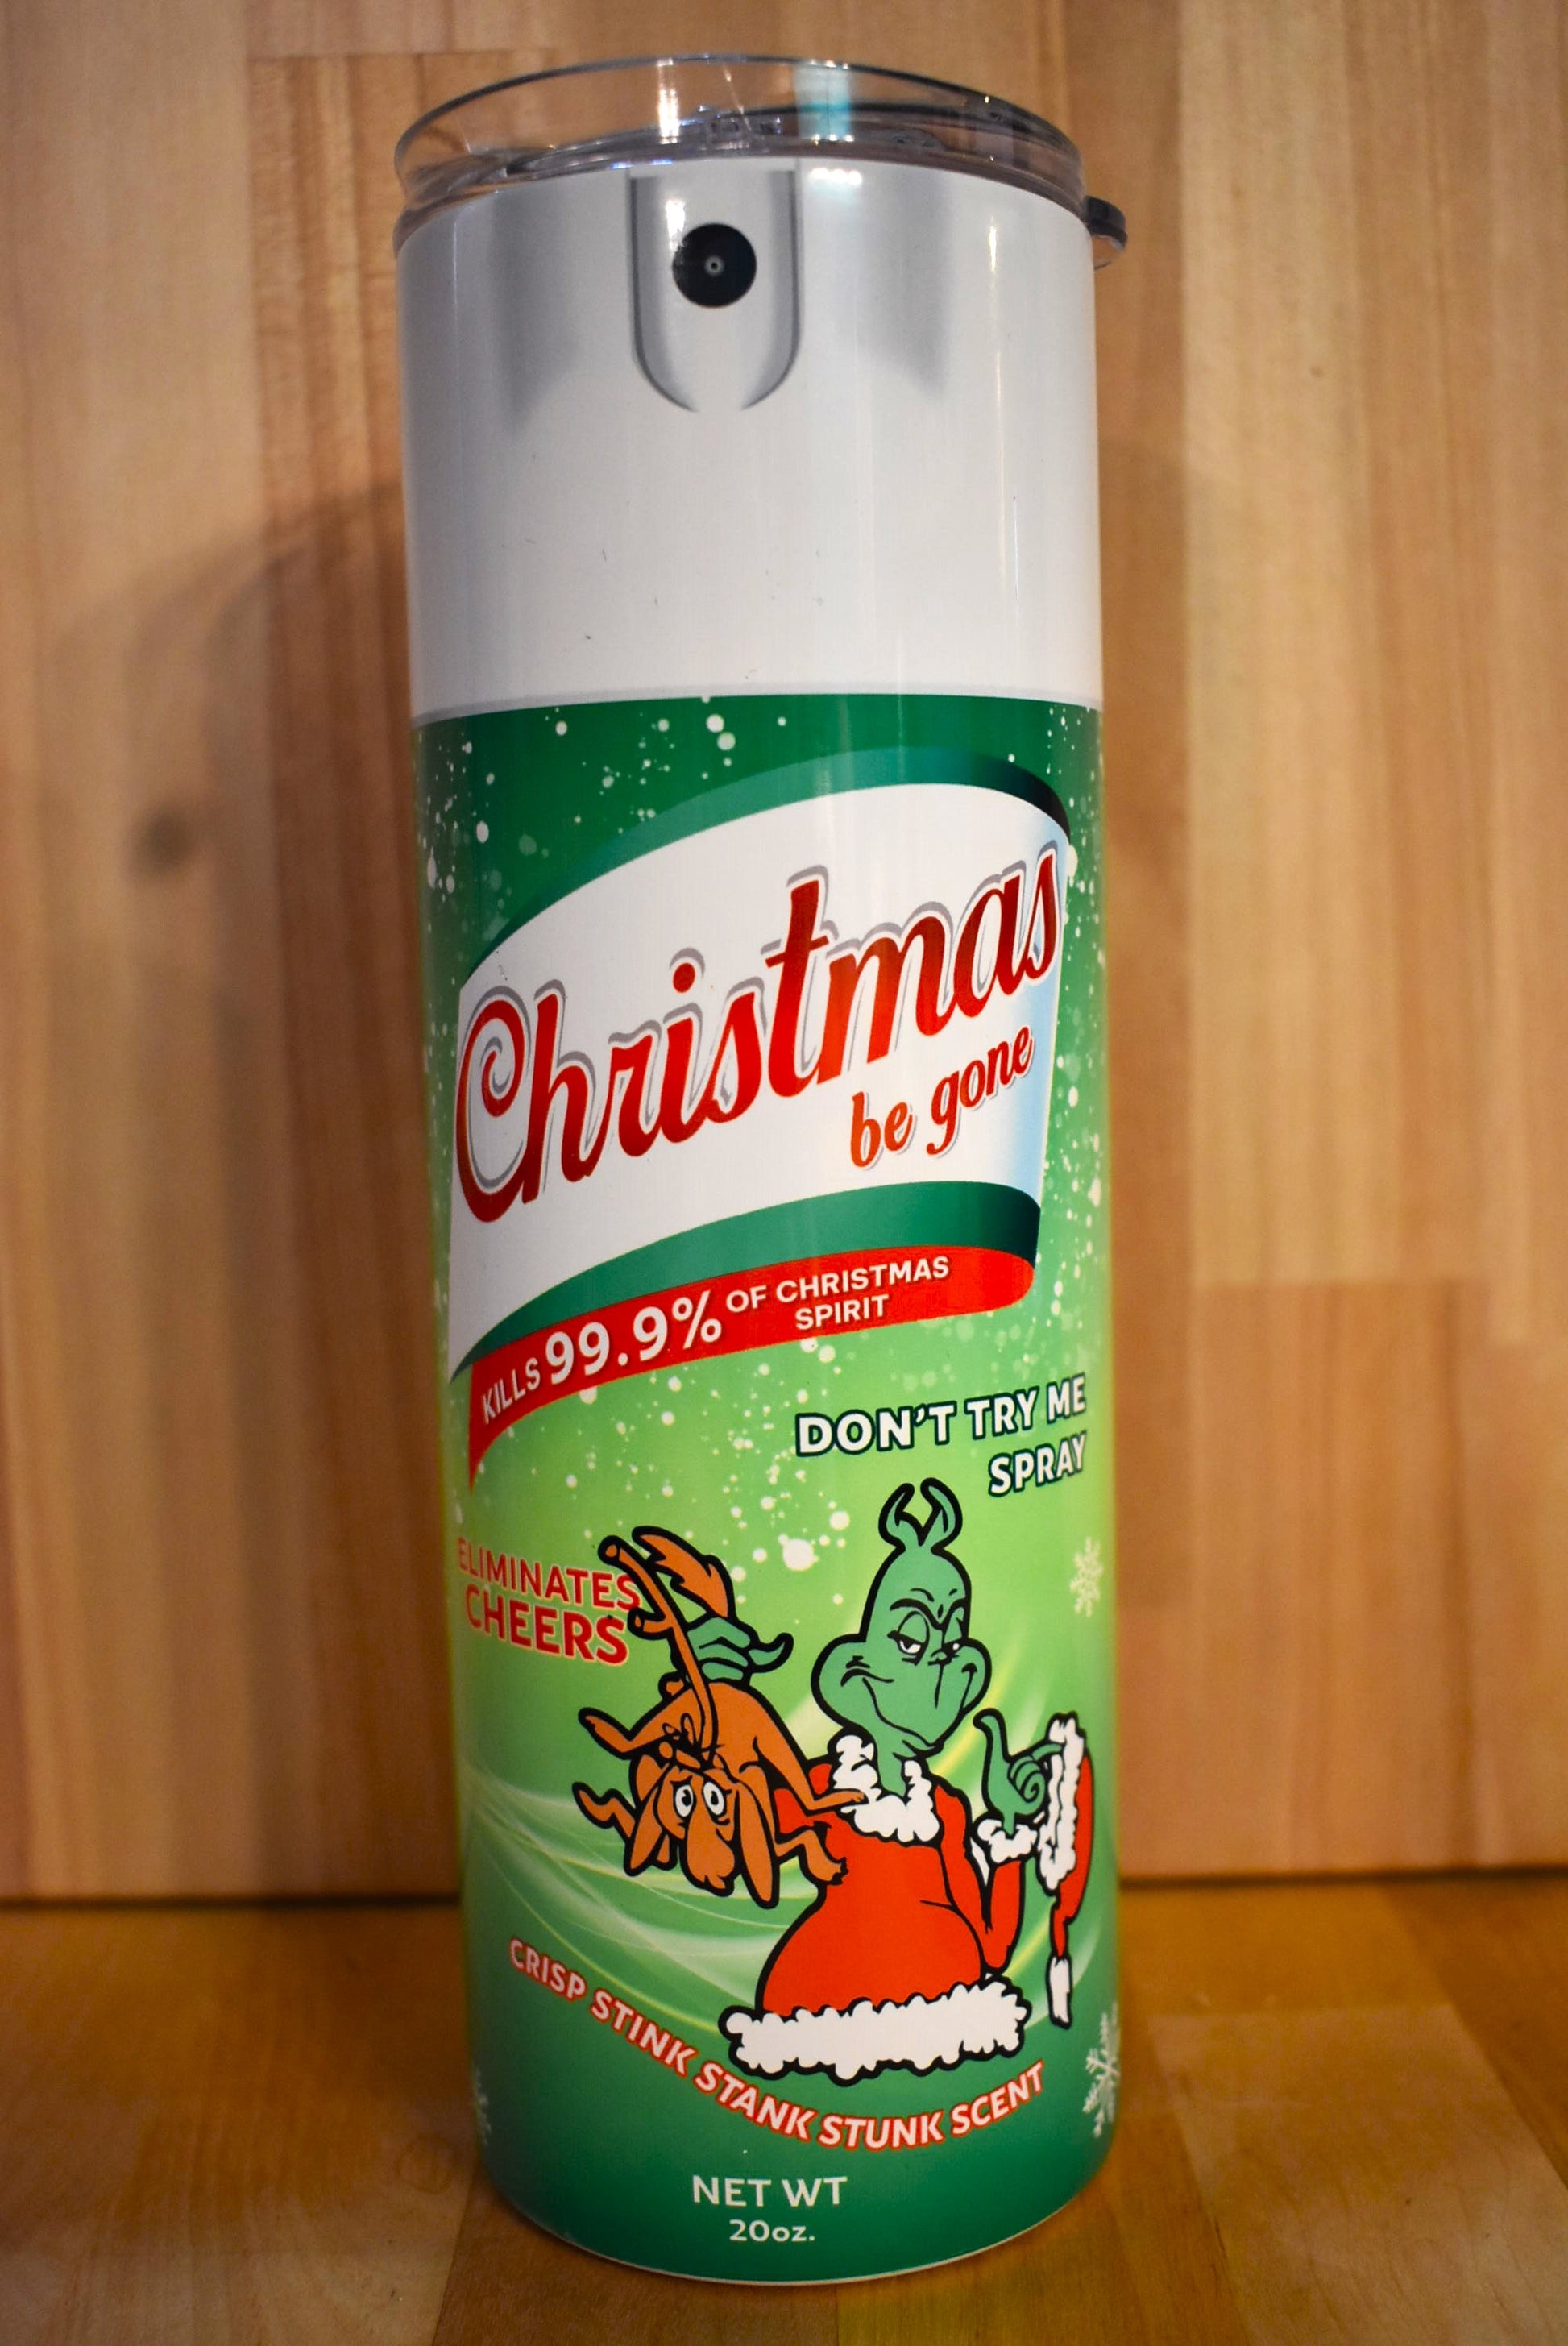 We brought you Bitch be Gone...and now just in time for the Holiday Season... we give you Christmas Be Gone. Specially formulated by the Grinch, this spray is guarantied to eliminate cheer with it's crisp stink stank stunk scent. 